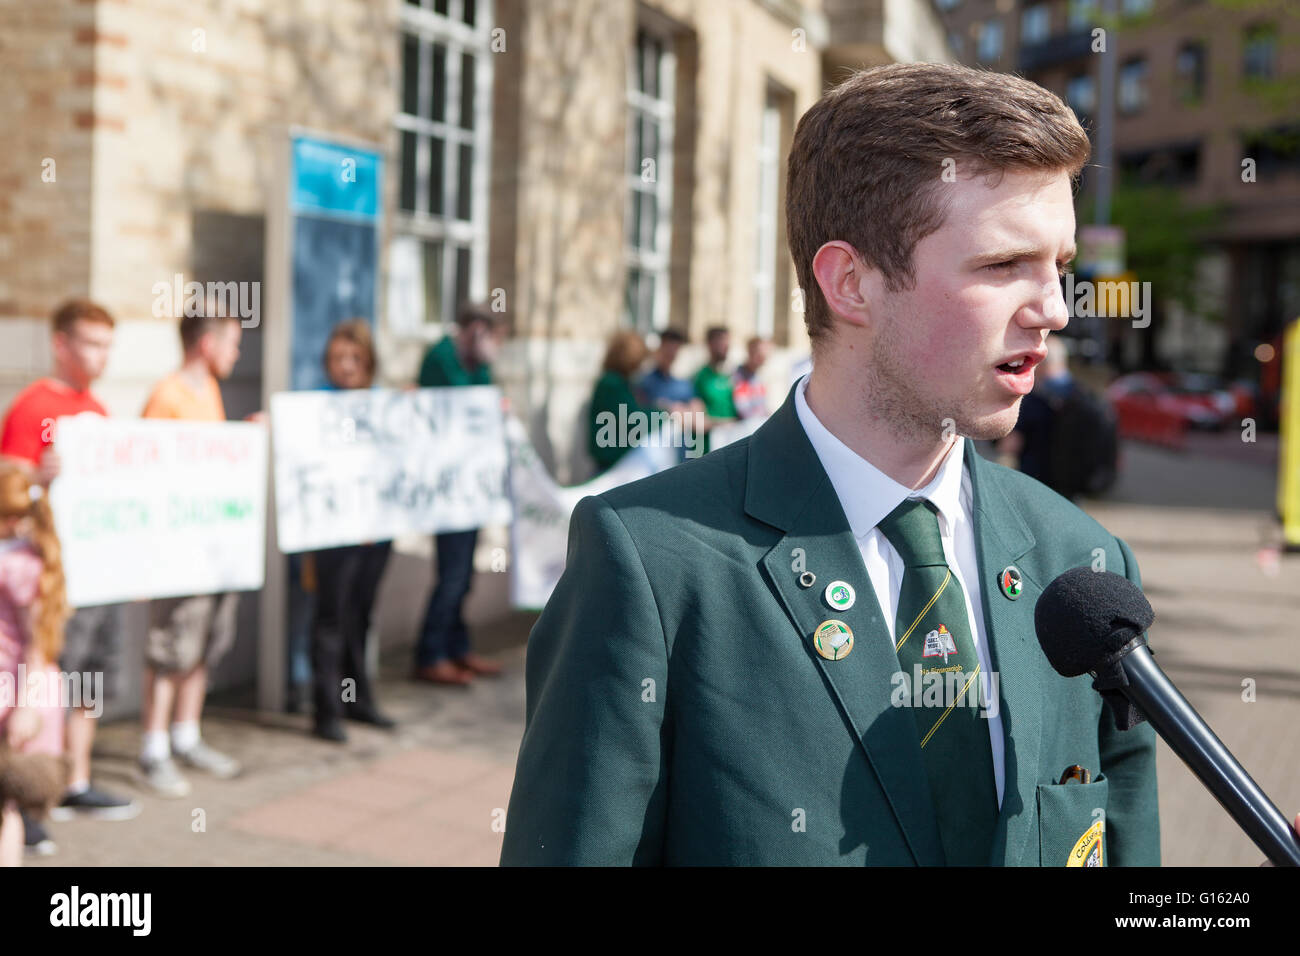 Belfast, UK. 9th May, 2016. Cónall Ó Corra from Coláiste Feirste school  who was the main speaker at the protest outside BBC headquarters Omeau Avenue Belfast, The protest is in connection with what was described as the BBC cutting them short, when a question was raised in regard to the Irish language during a the BBC election debate Stock Photo